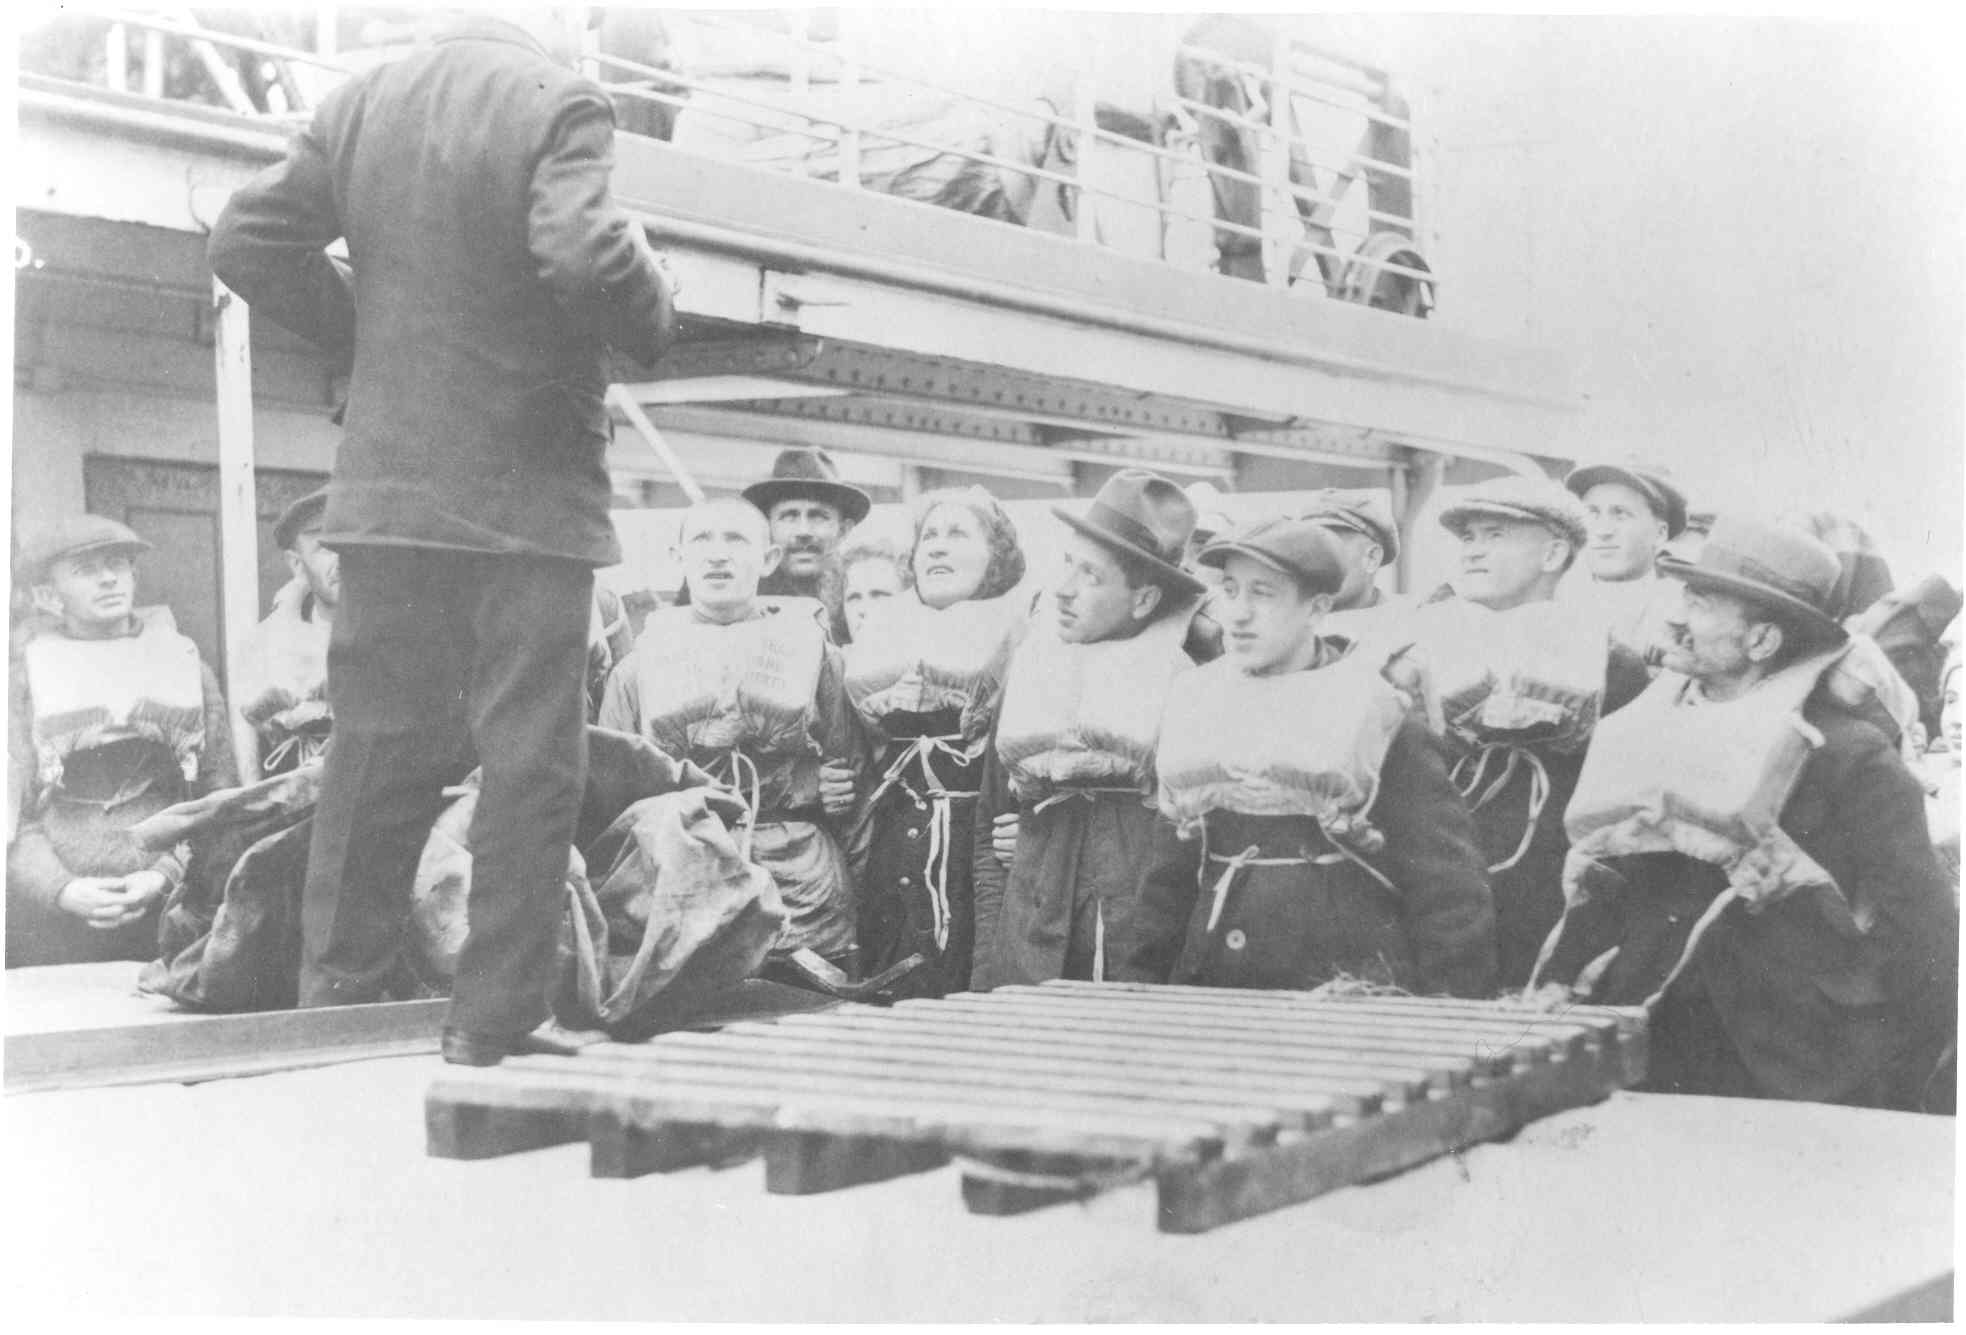 Steerage immigrants on ship from Ukraine, 1926. Ontario Jewish Archives, Blankenstein Family Heritage Centre, item 541.